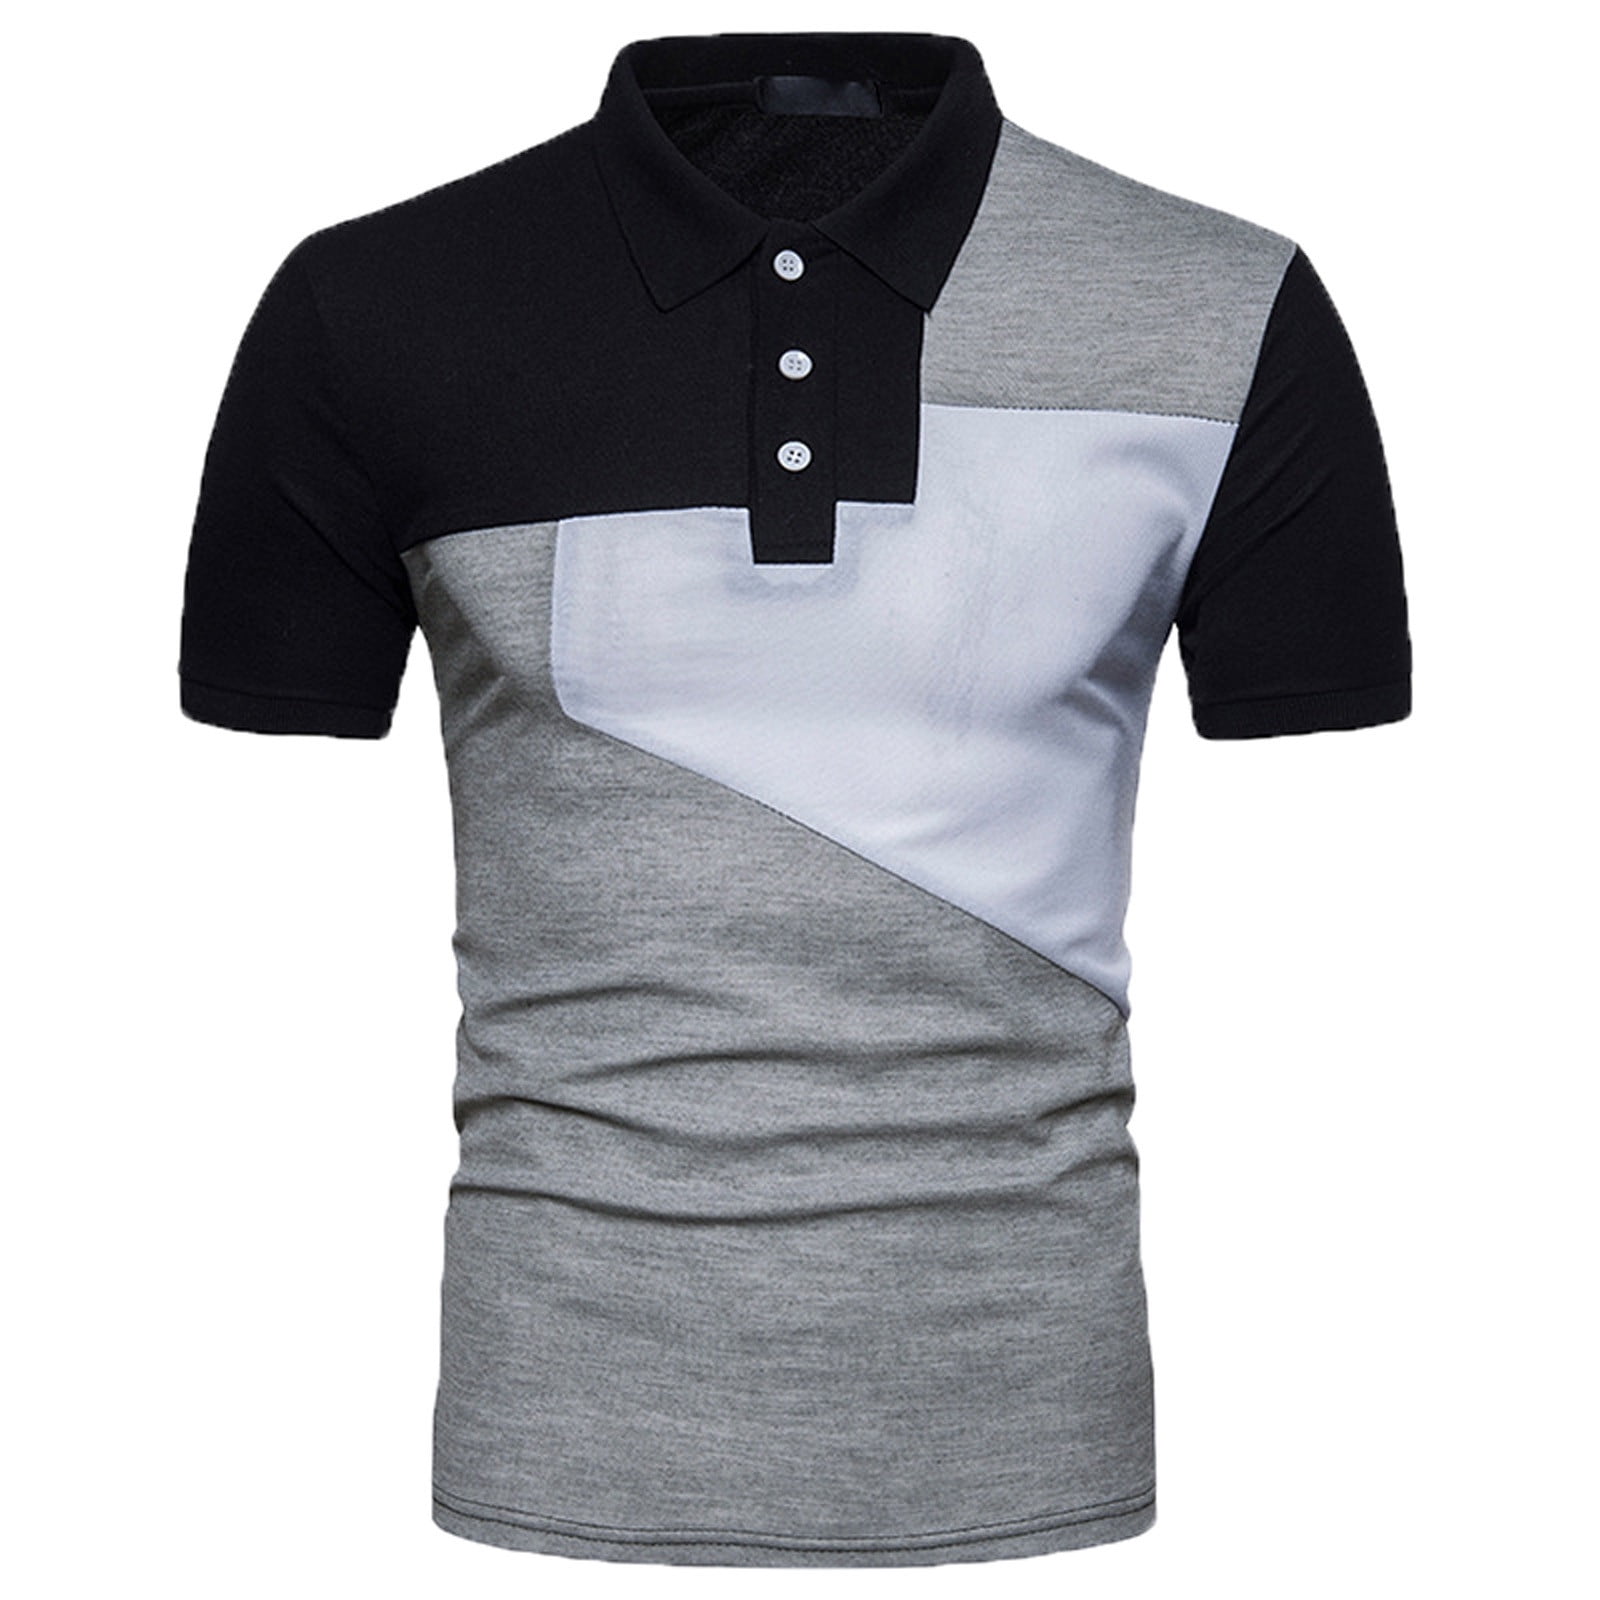 jsaierl Mens Polo Shirts Slim Fit Short Sleeve Tops Color Block Summer ...